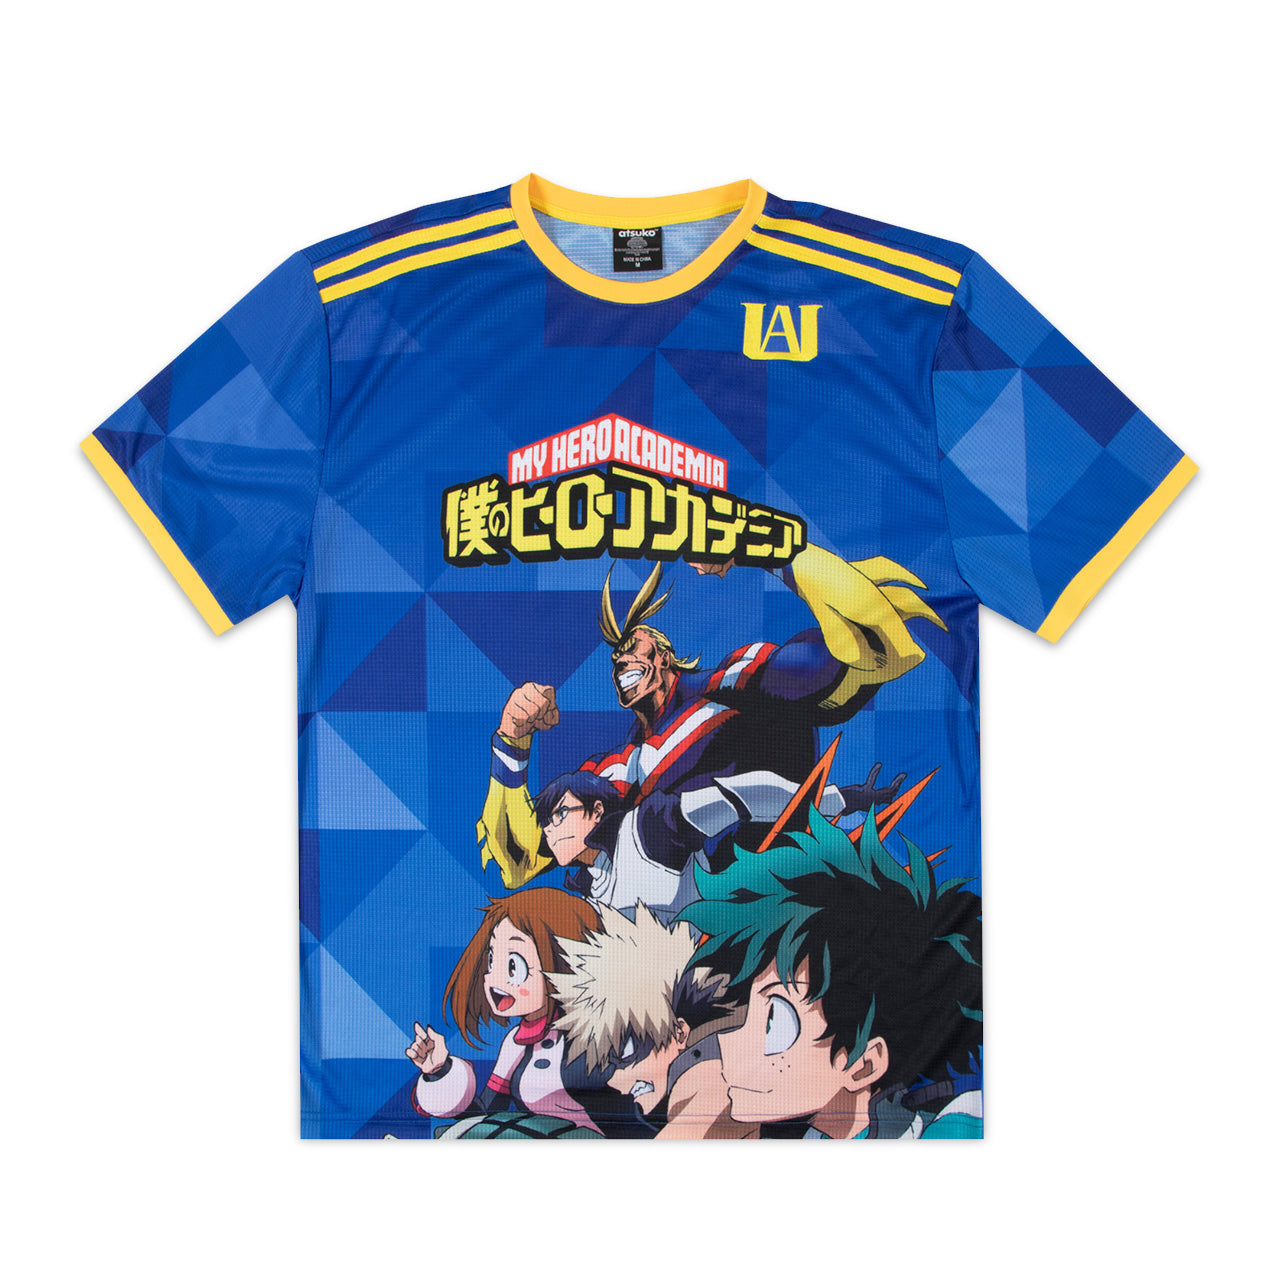 My Hero Academia - Class 1-A Soccer Jersey image count 0